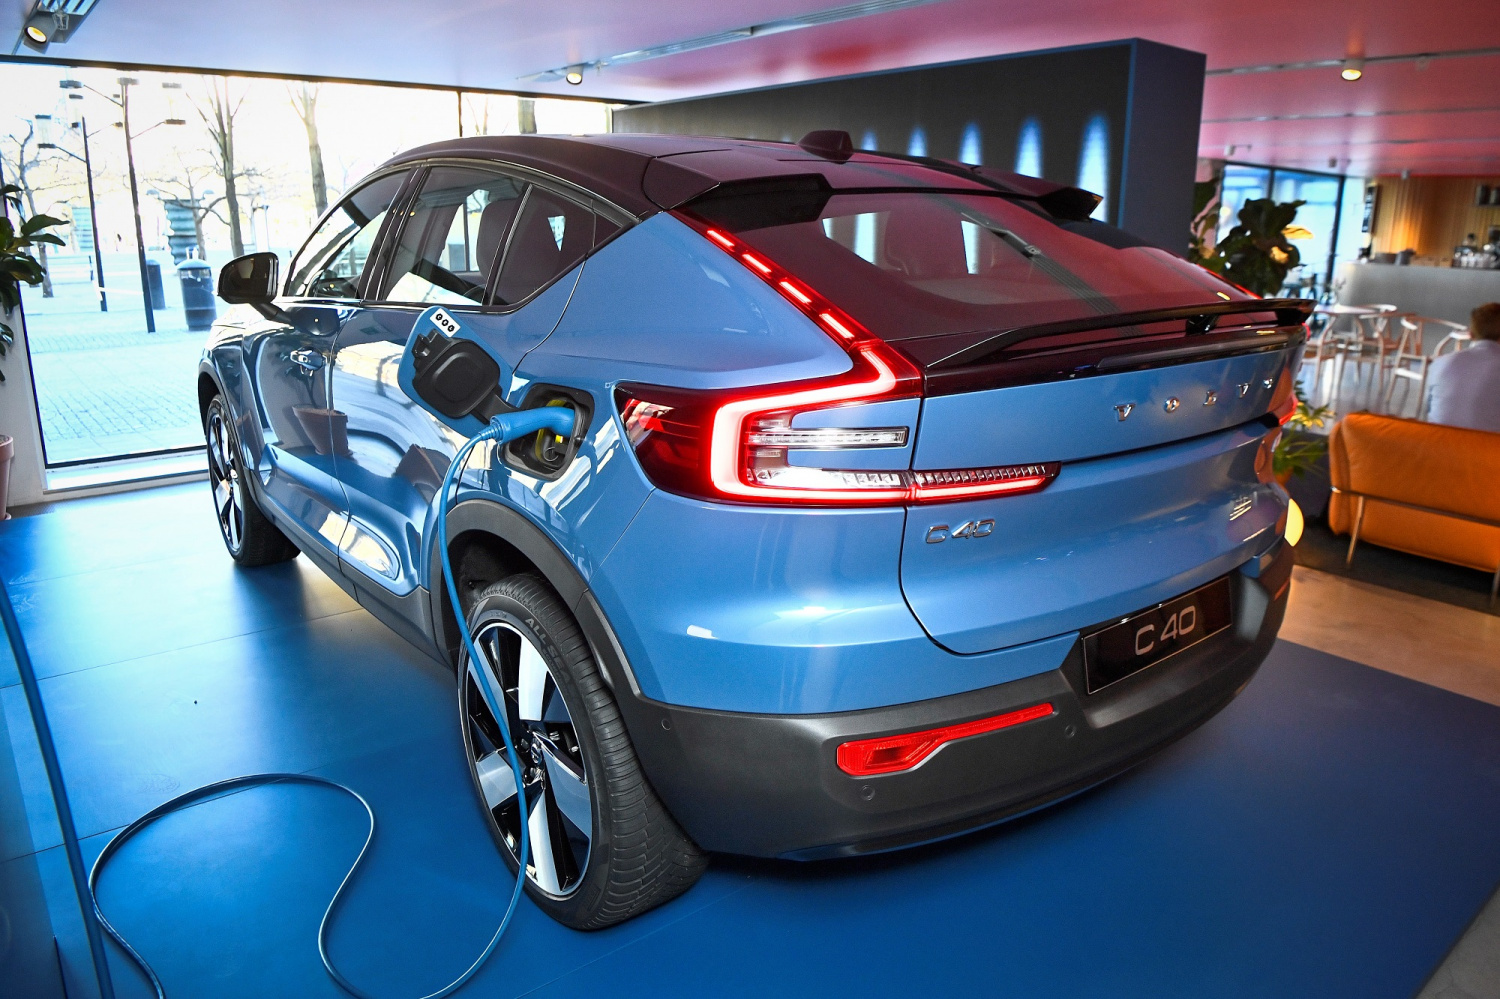 Volvo To Sell Only Electric Cars By 2030, Starting With Its New C40